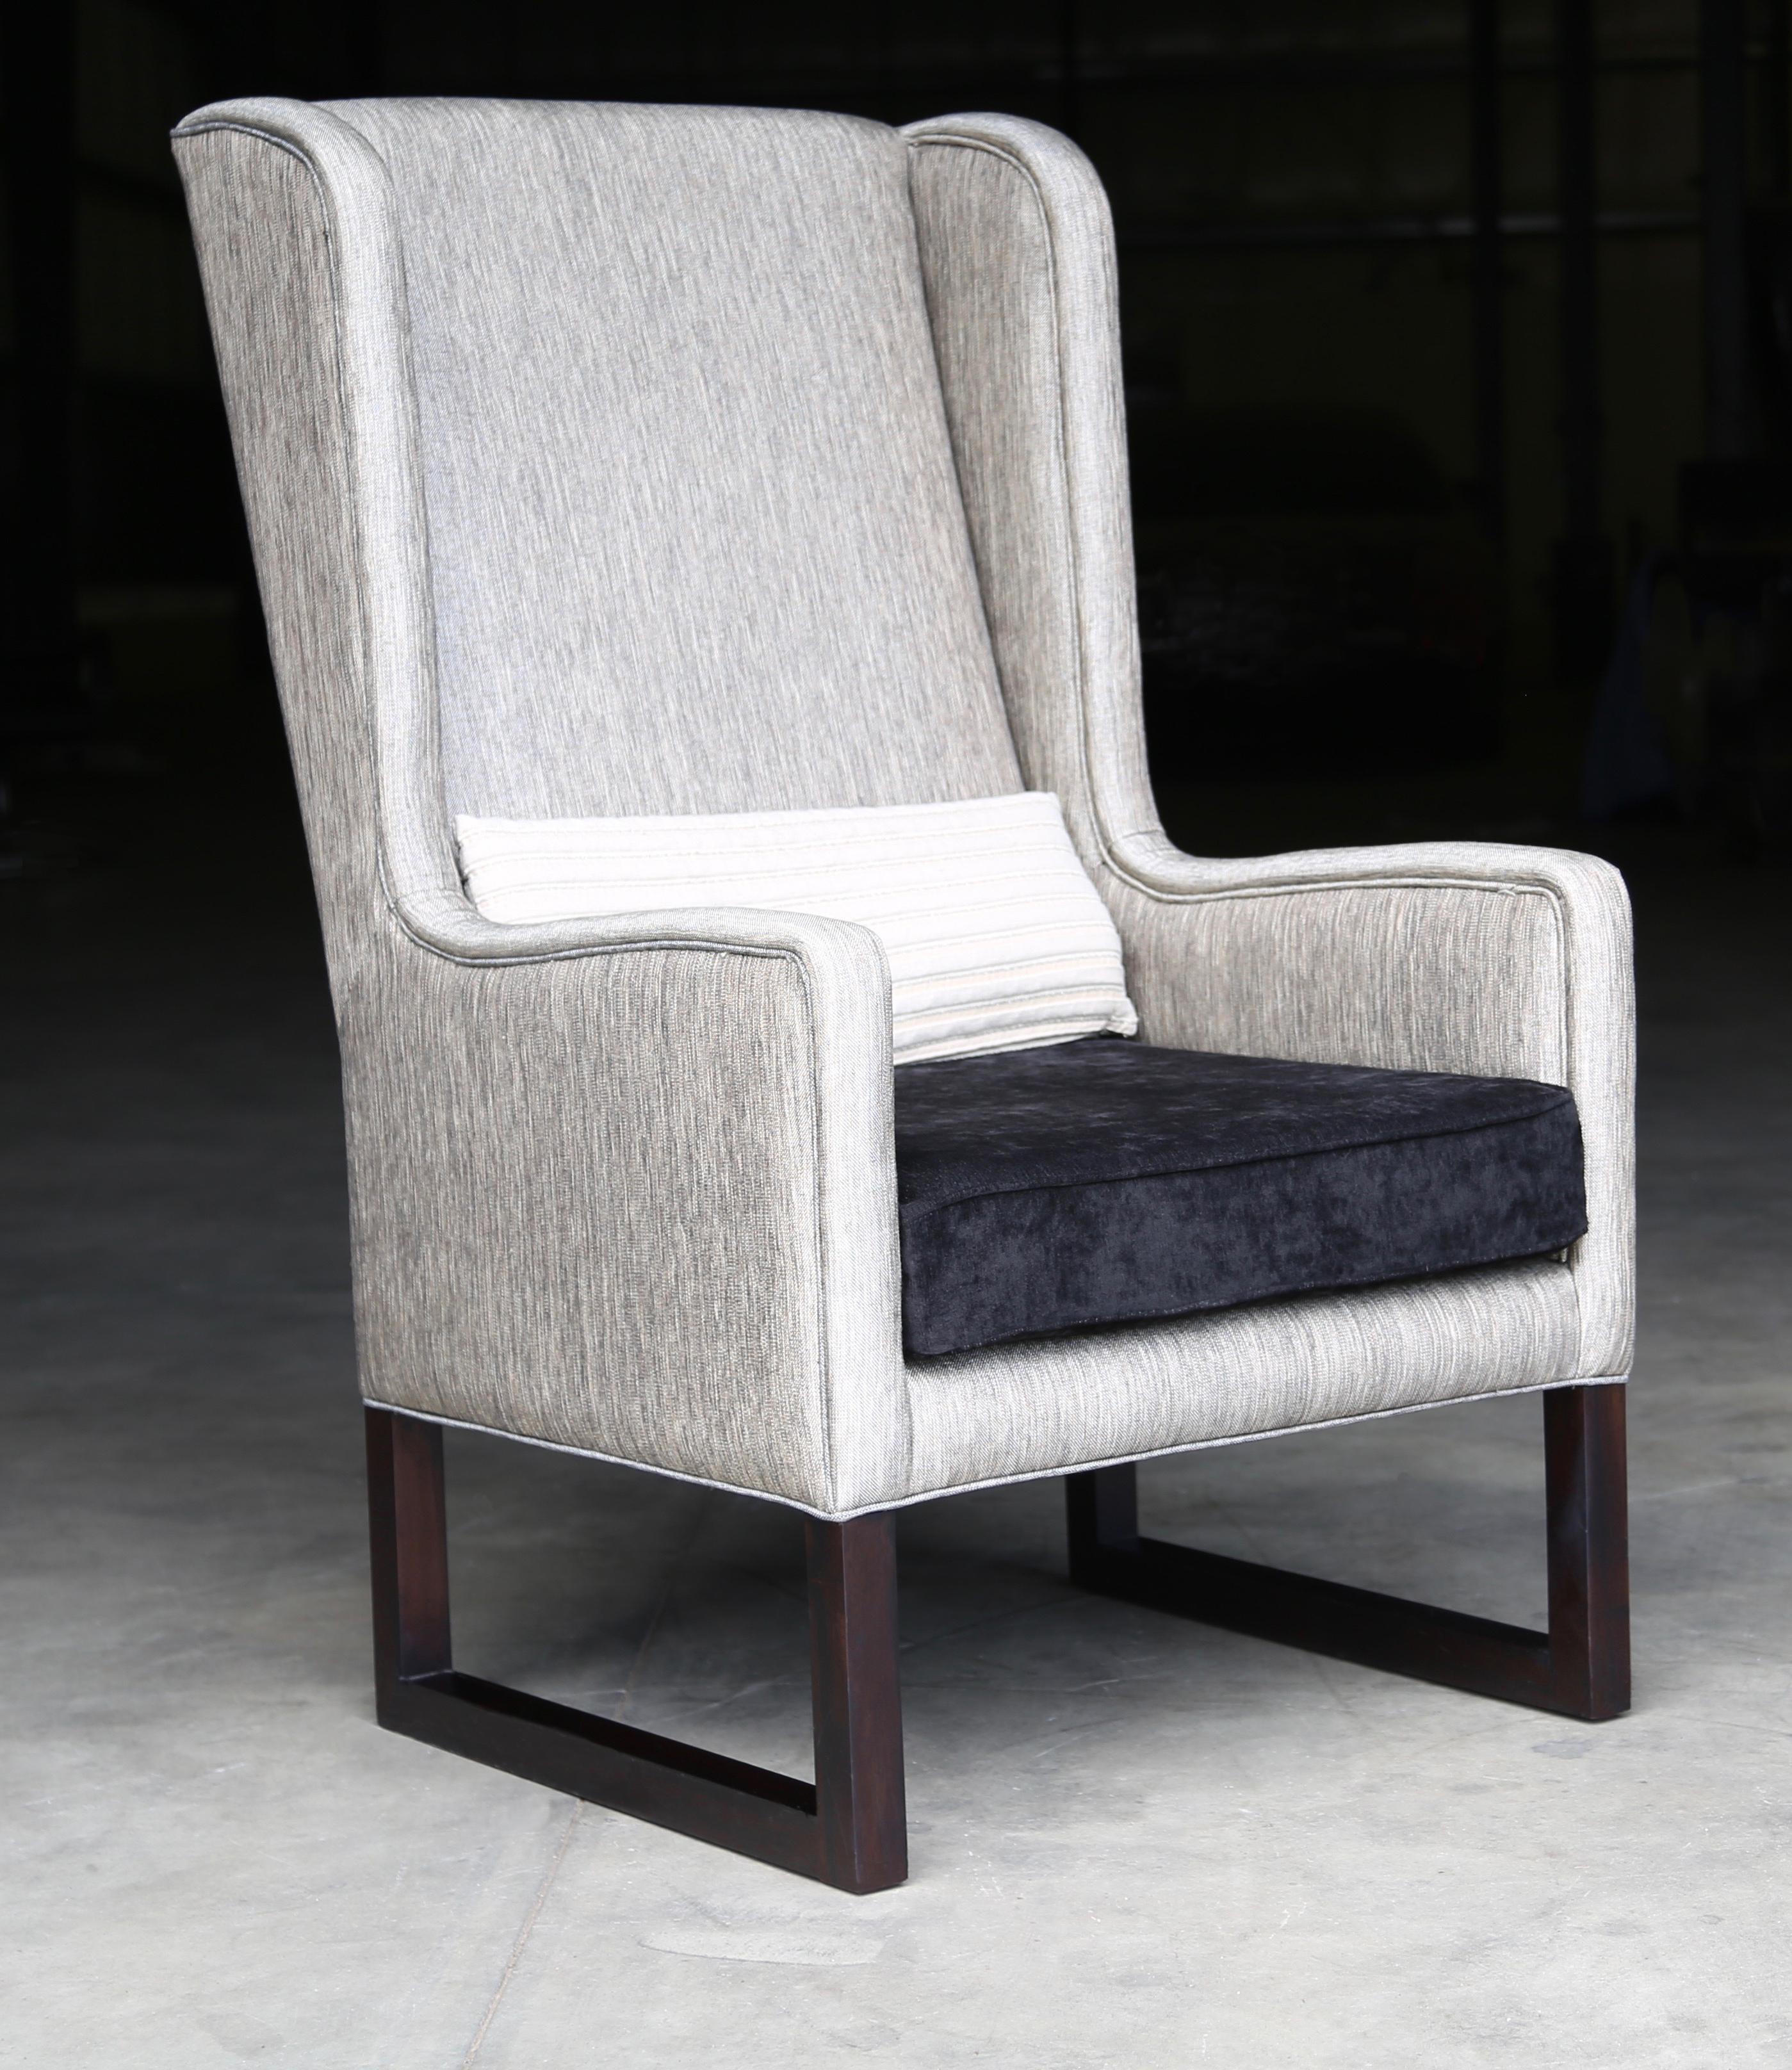 Matteo Modern High Back Upholstered Wing Chair from Costantini

Les dimensions sont 23